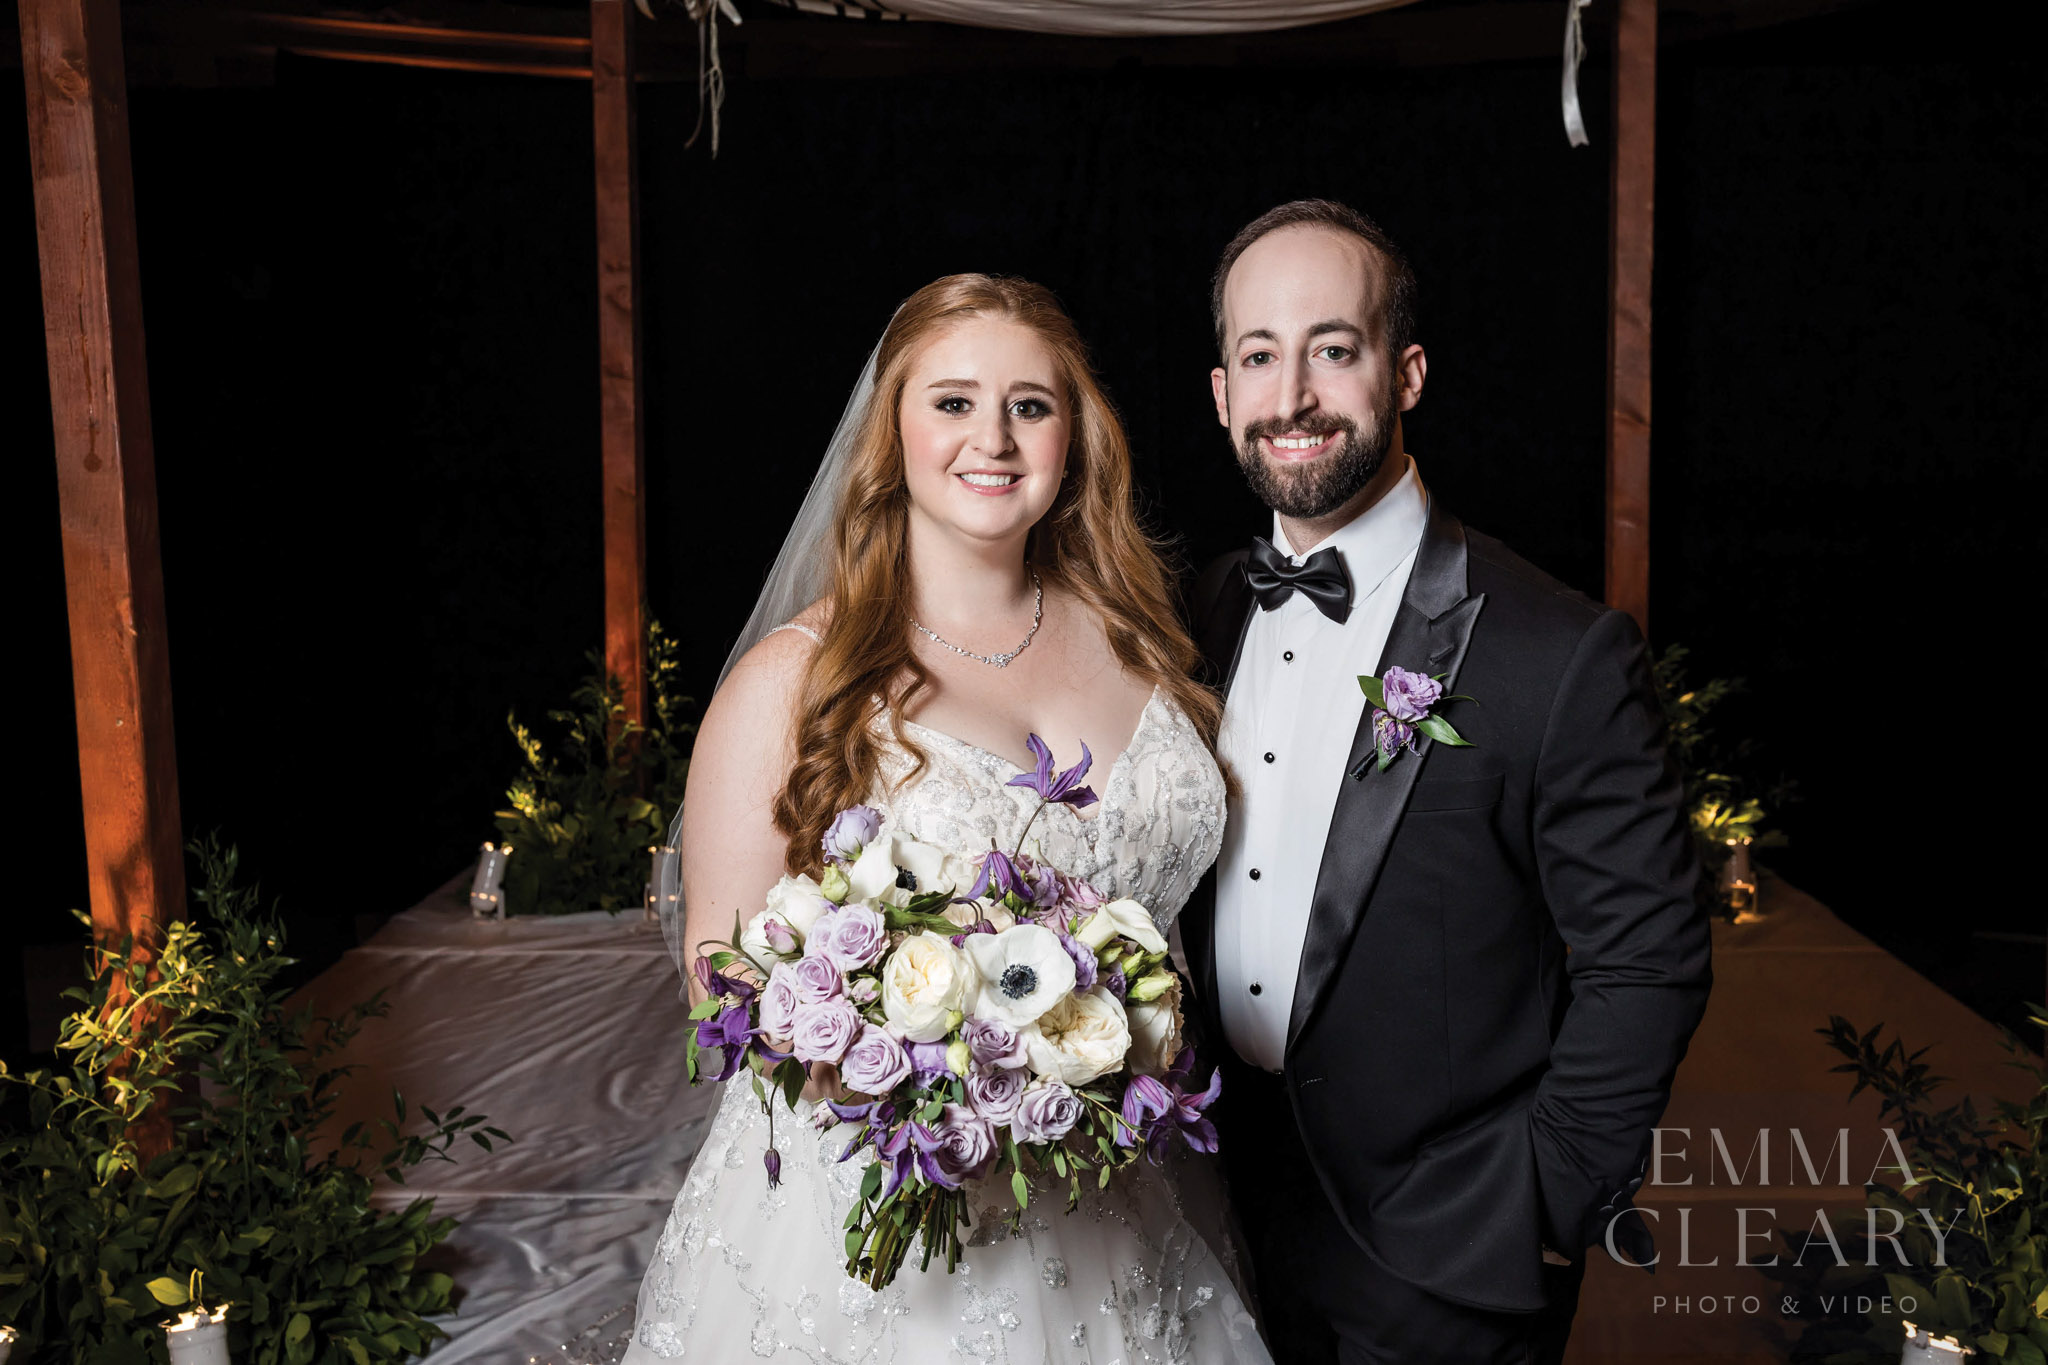 Portrait of the bride and groom